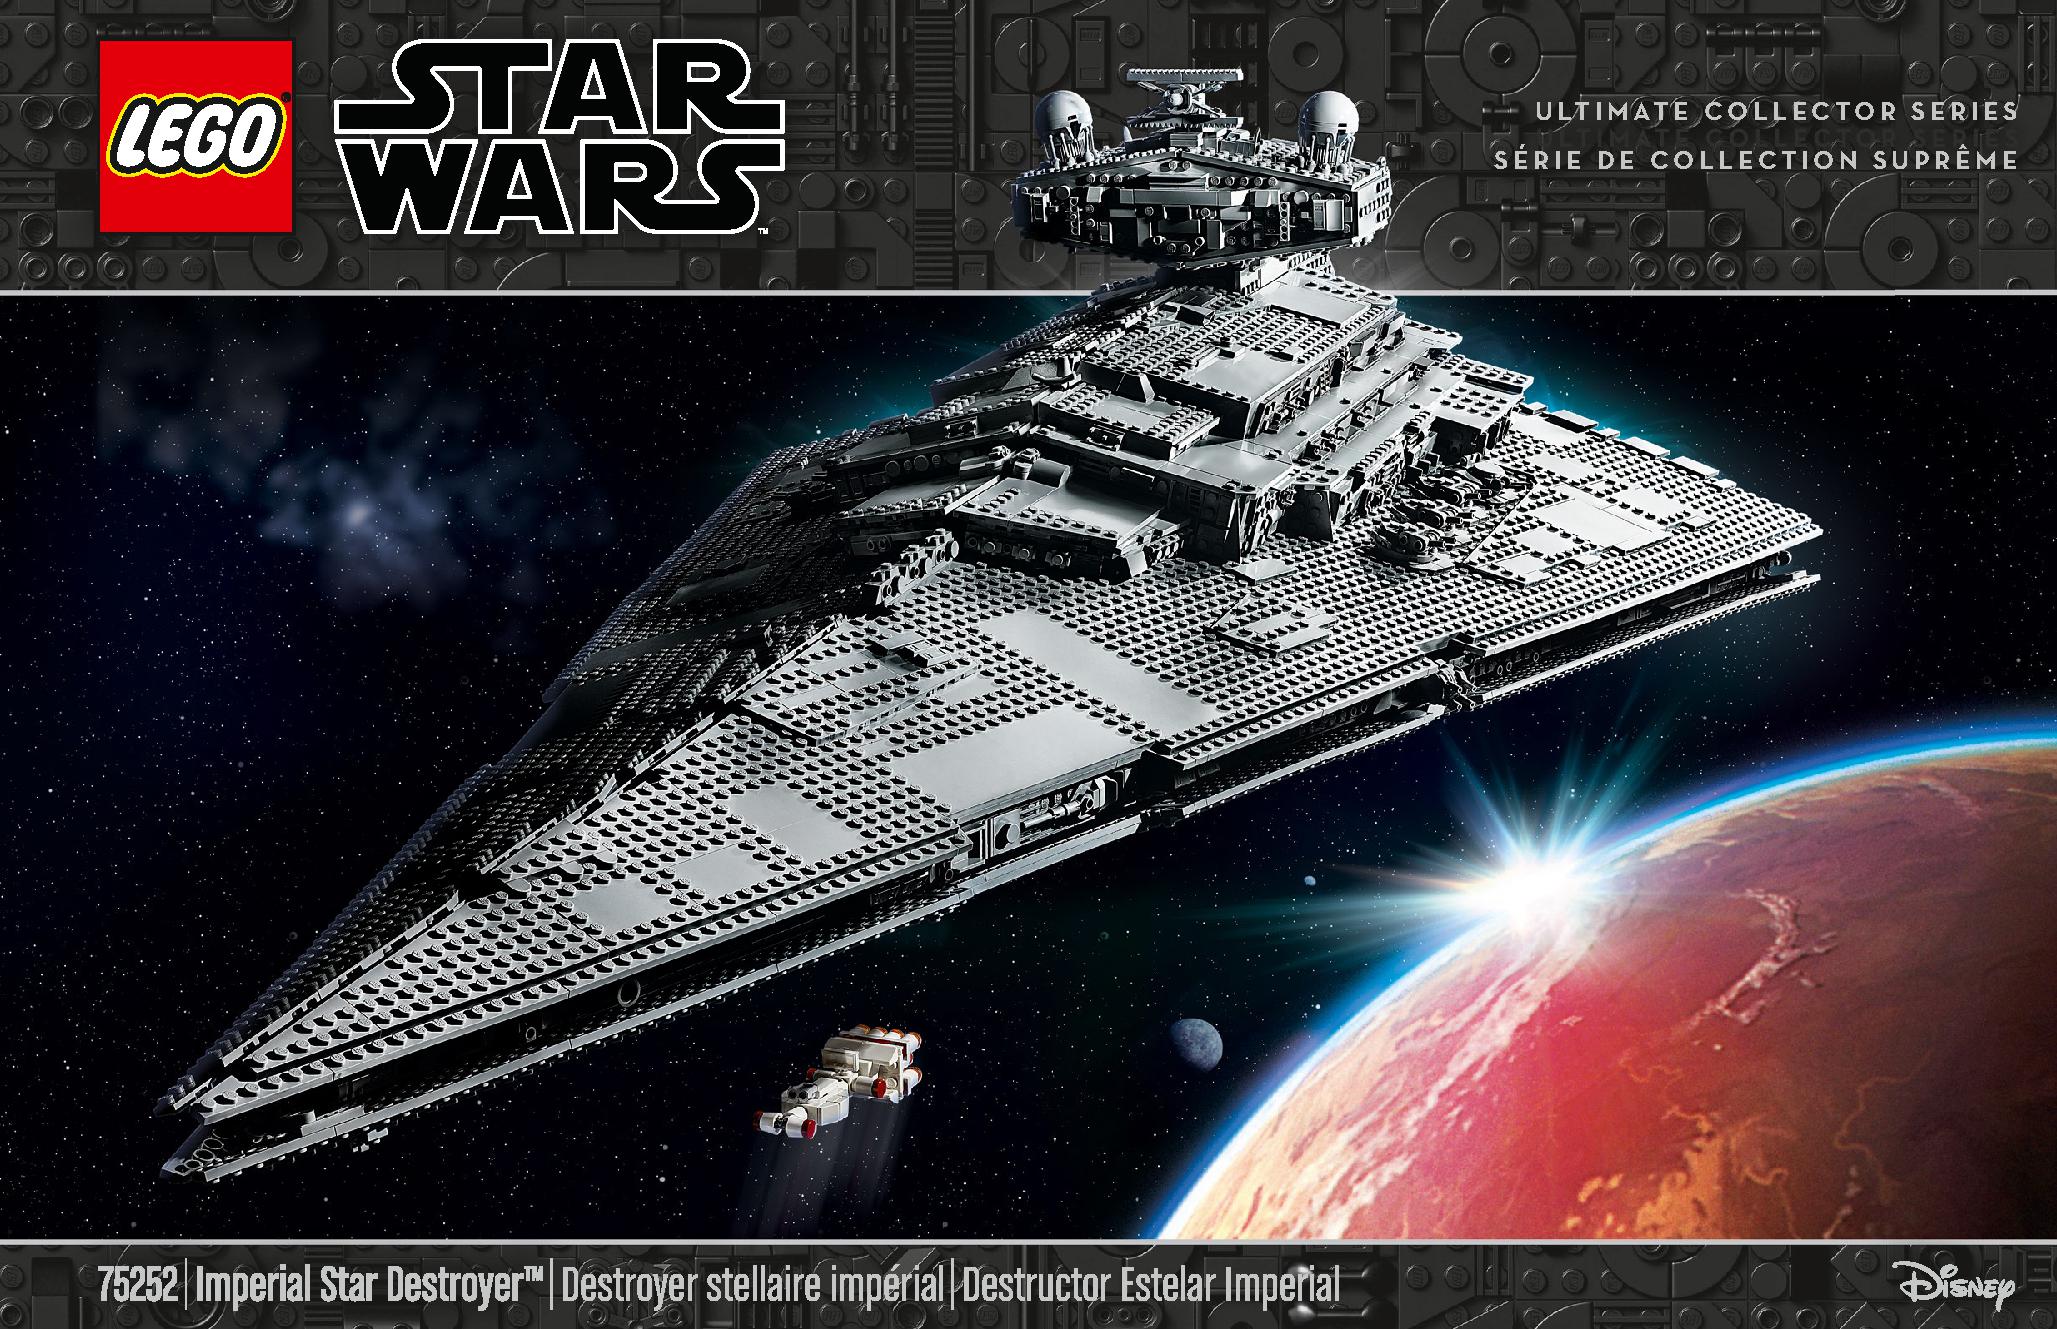 Imperial Star Destroyer 75252 レゴの商品情報 レゴの説明書・組立方法 1 page